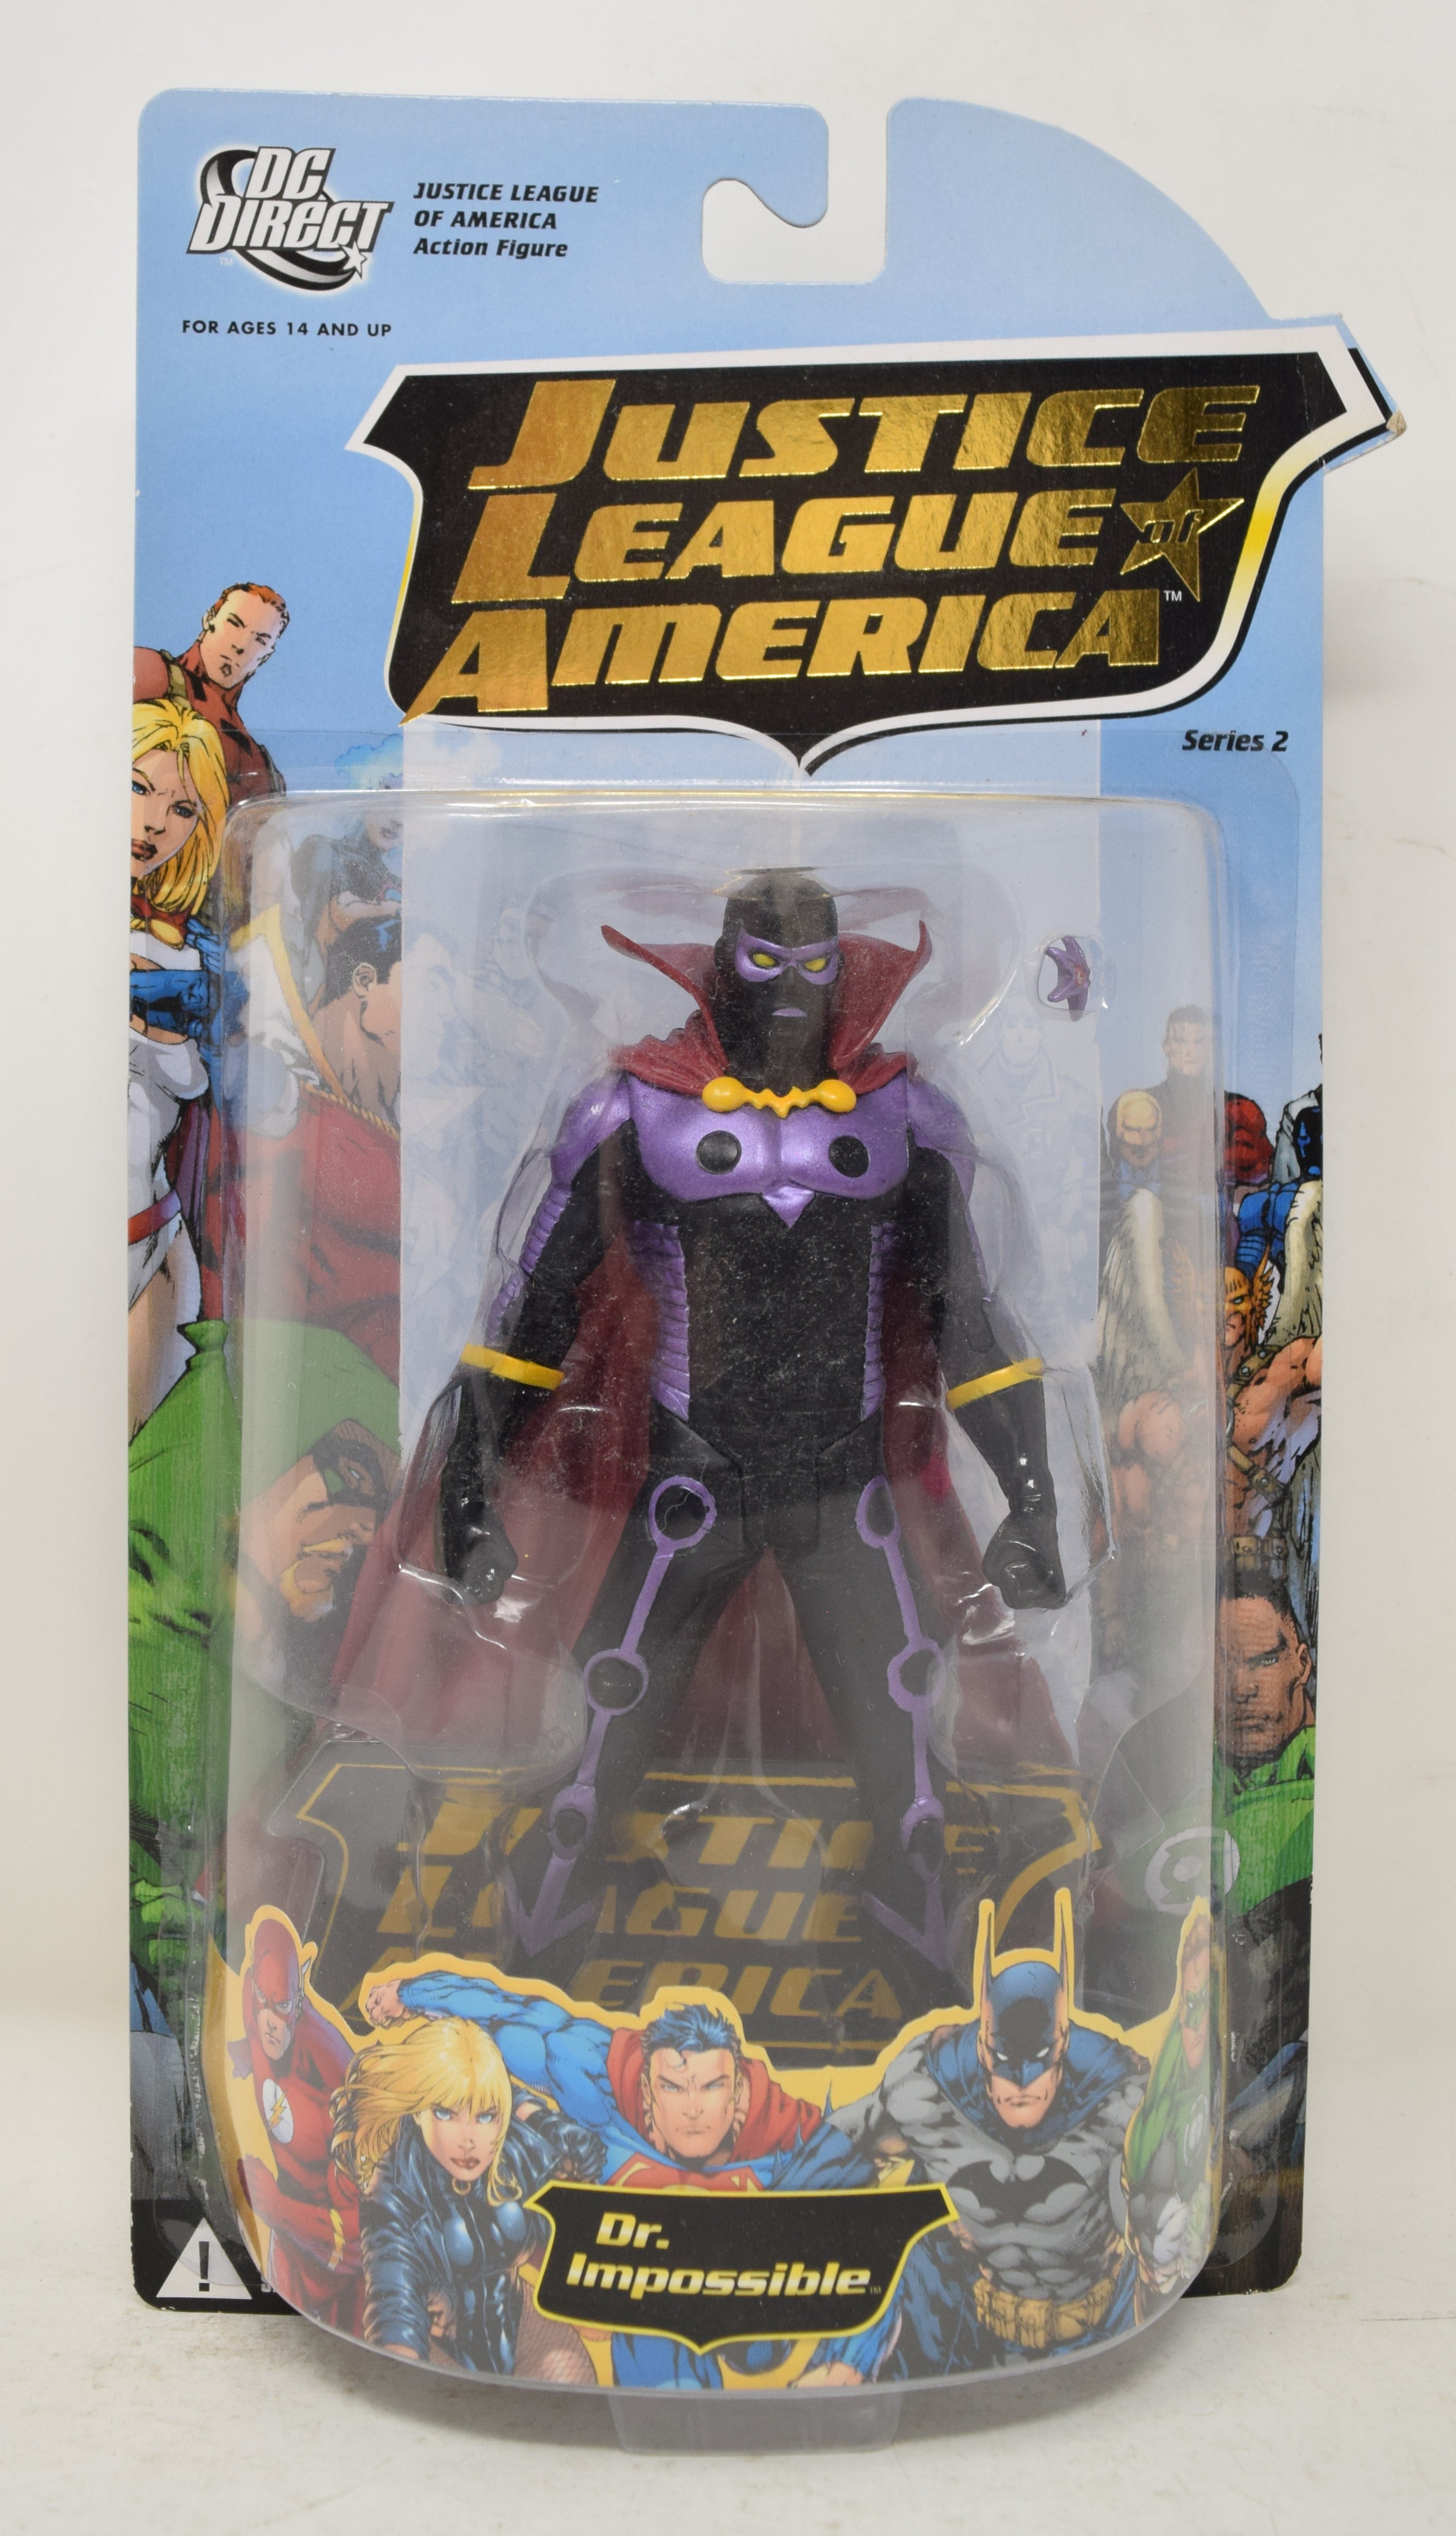 Justice League of America Series 2 - Dr. Impossible フィギュア